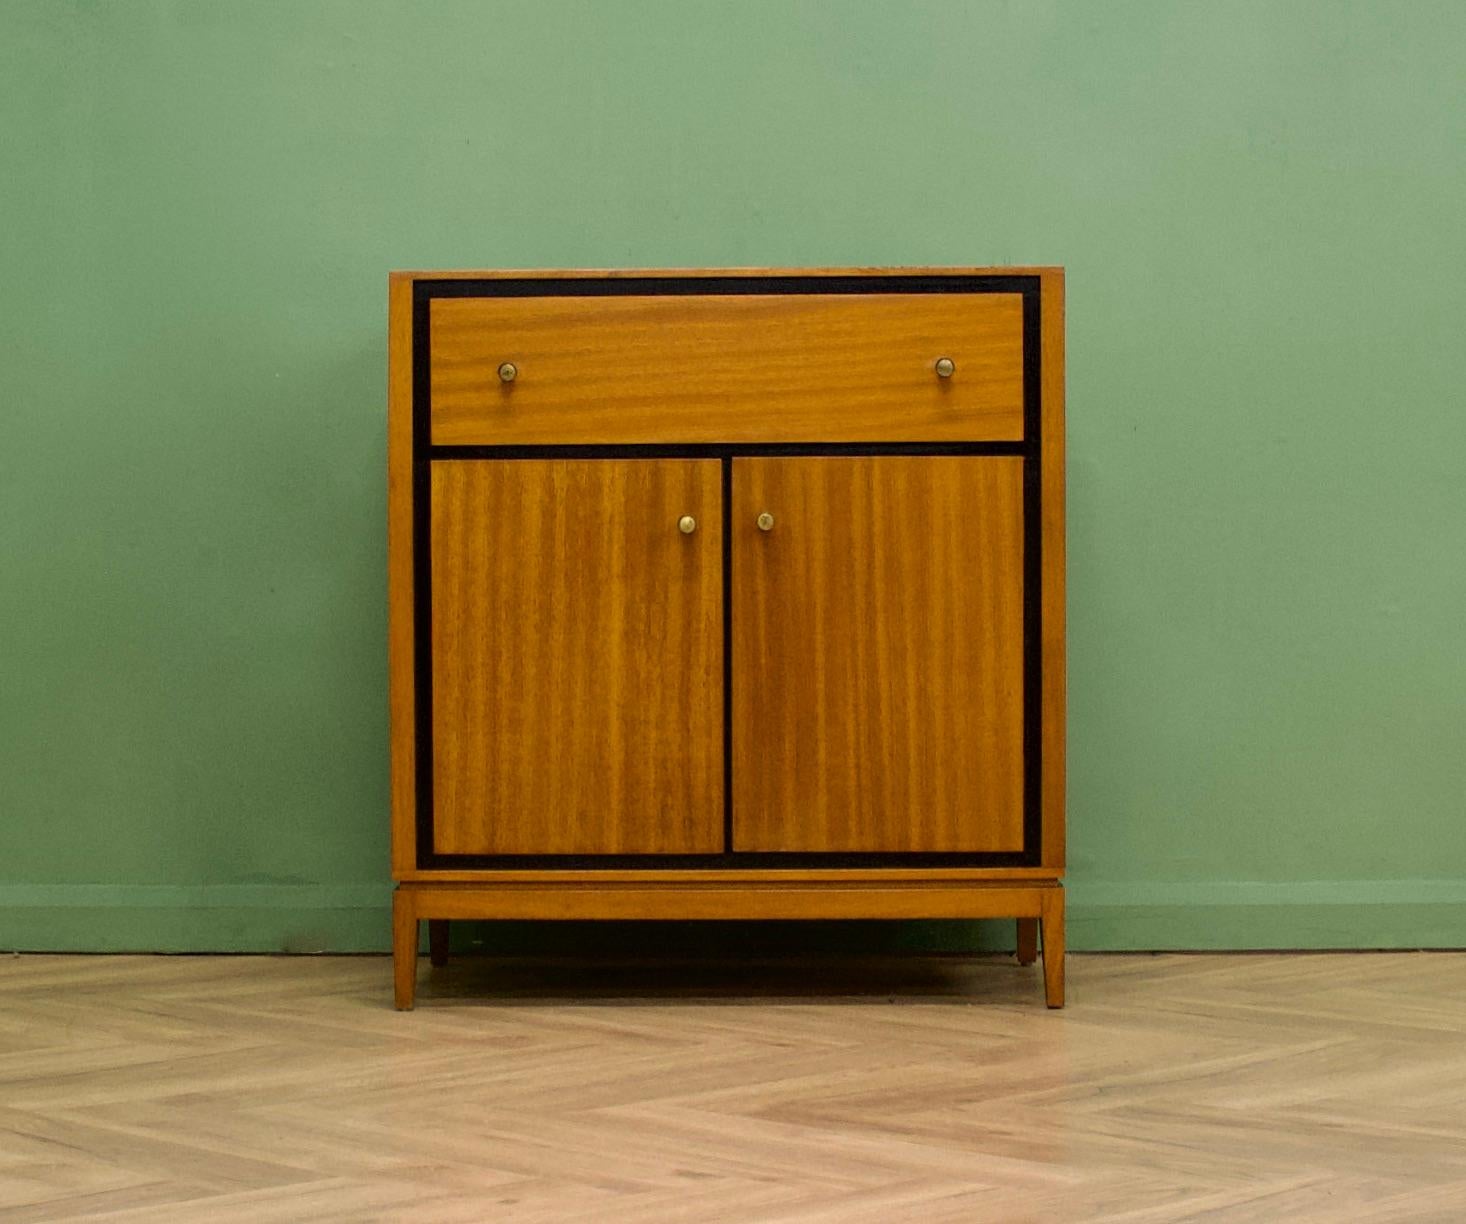 A teak & mahogany compact sideboard or cupboard from Loughborough Furniture - retailed through Heals during the 1950s
With an ebonised trim
Featuring a drawer to the top and a cupboard - with an internal shelf